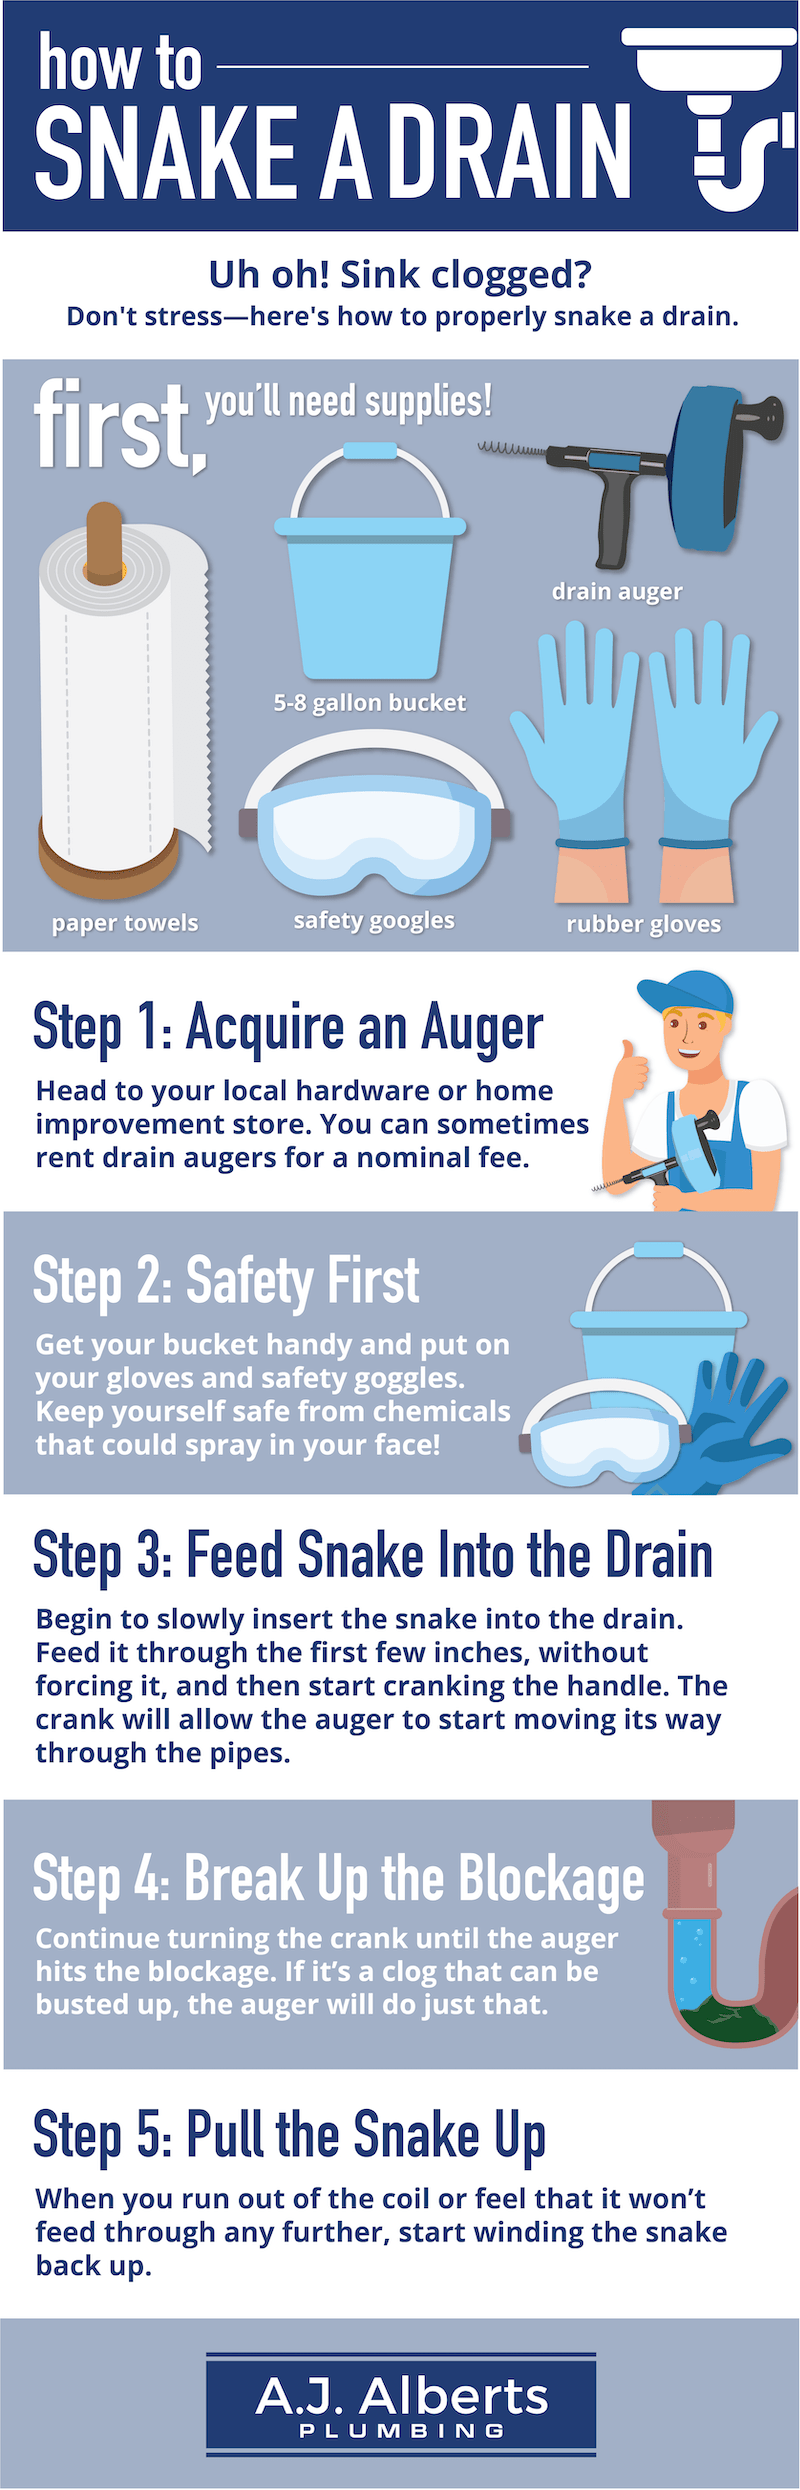 how to snake a drain infographic